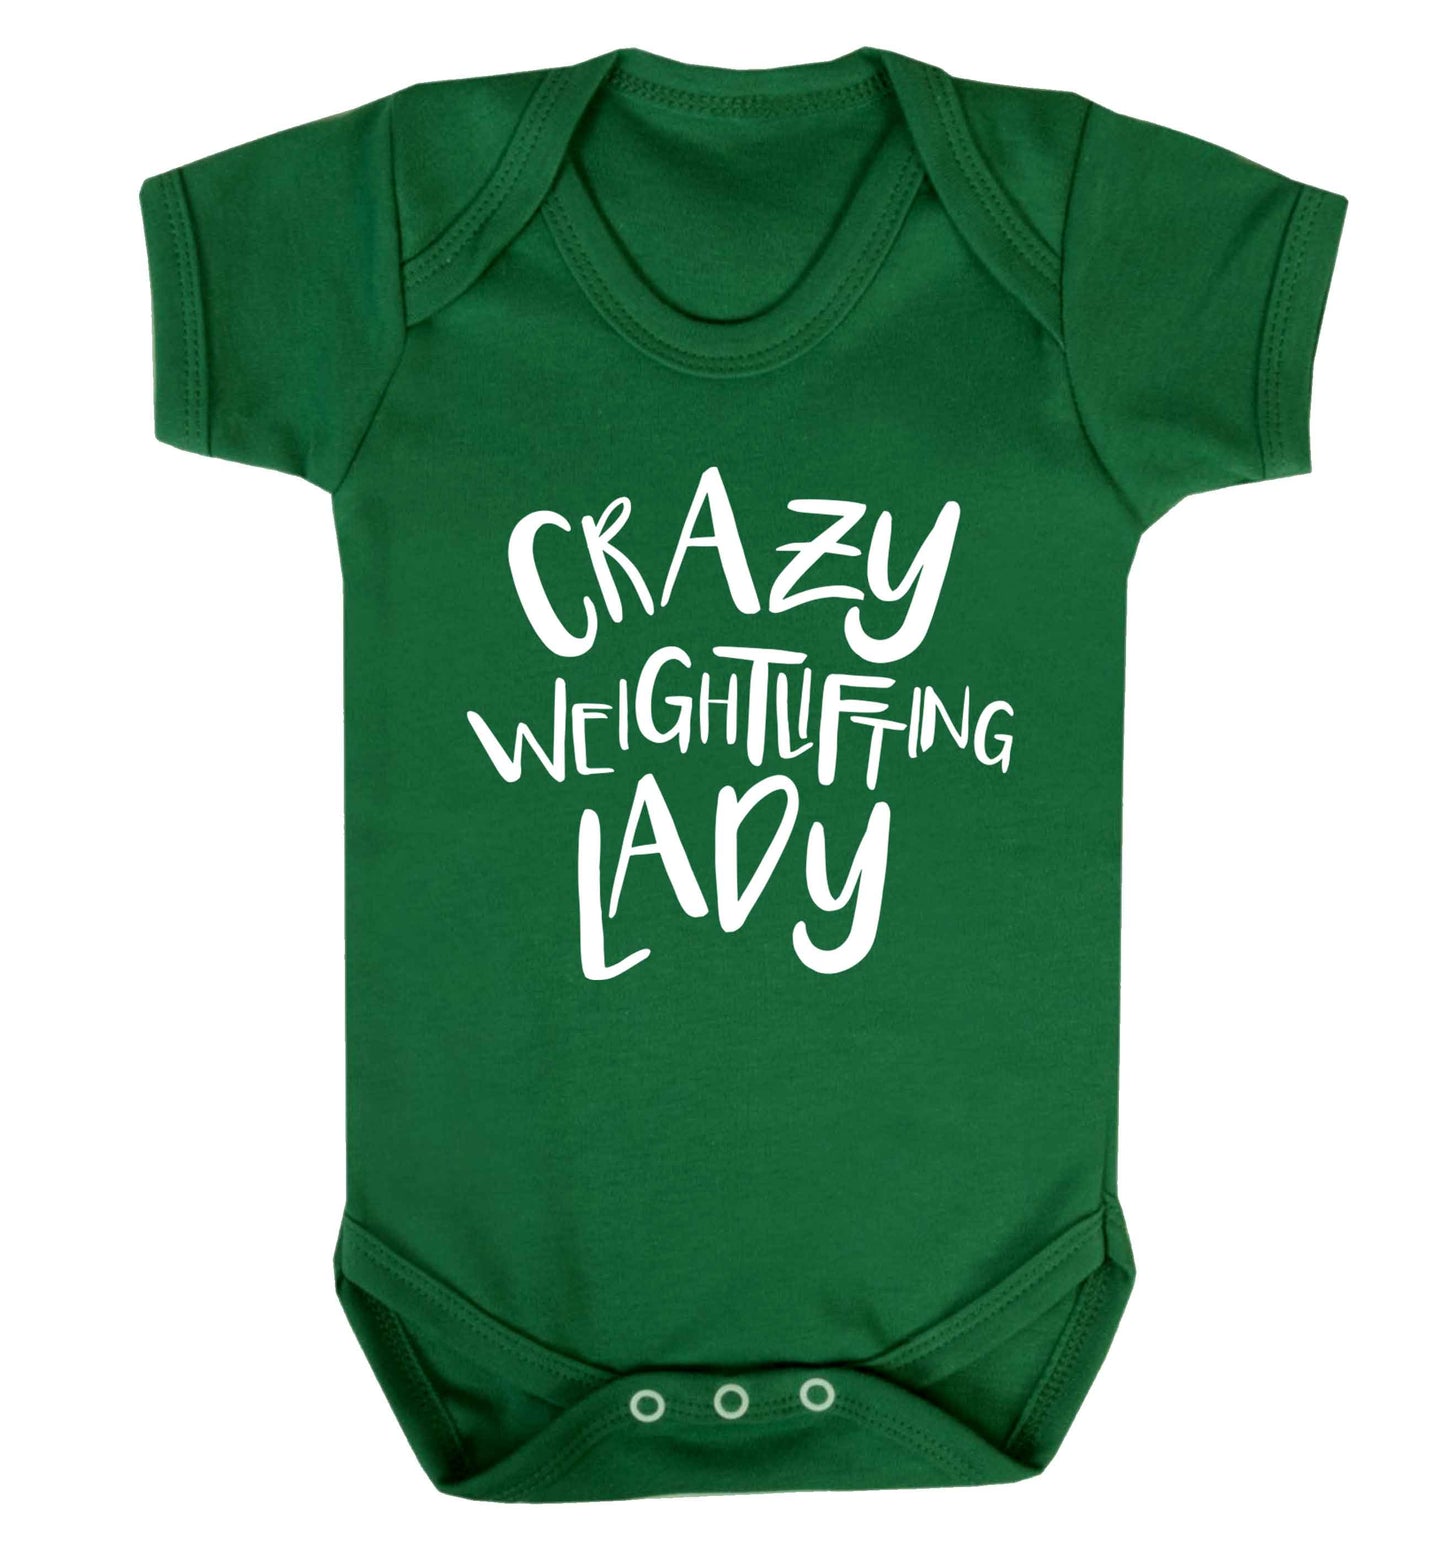 Crazy weightlifting lady Baby Vest green 18-24 months